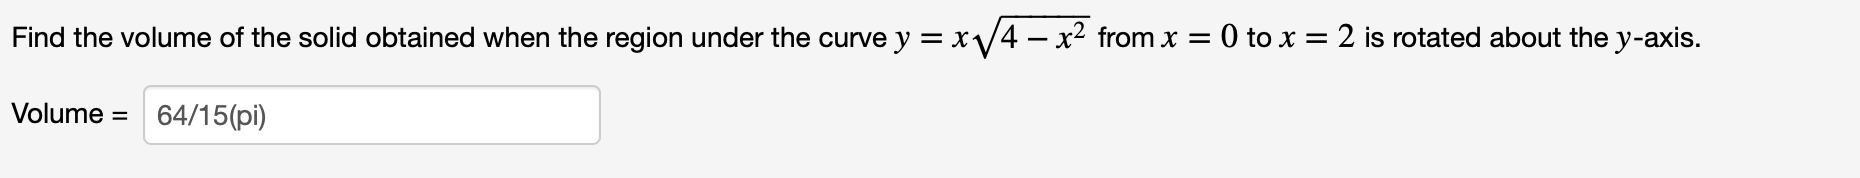 Find the volume of the solid obtained when the region under the curve y = x/4 – x2 from x = 0 to x = 2 is rotated about the y-axis.
